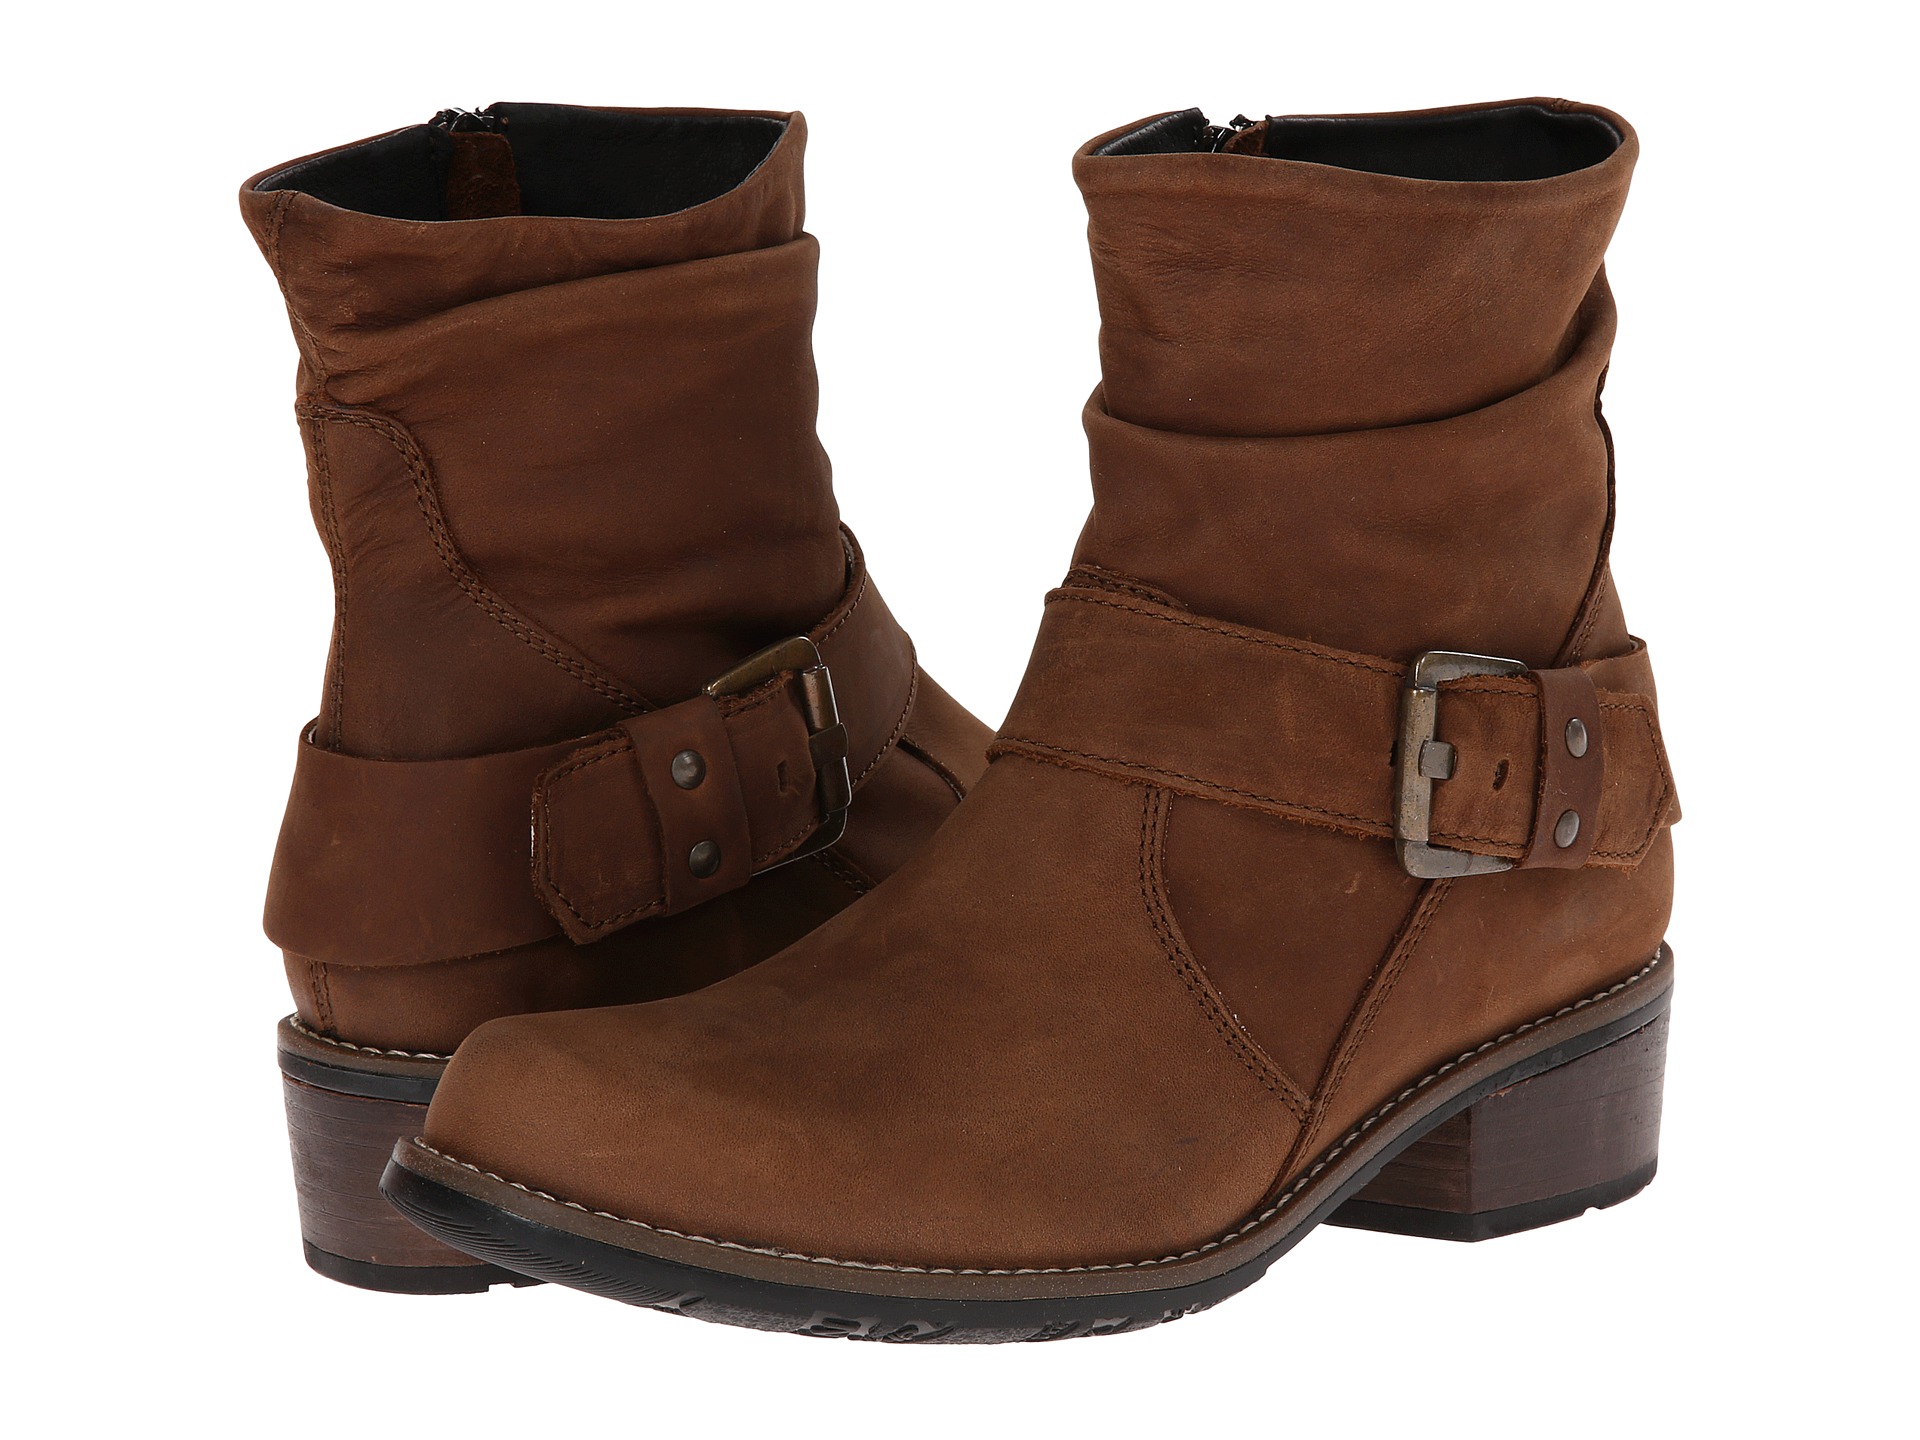 Wolky Lerma Chocolate Cowgate - Zappos.com Free Shipping BOTH Ways